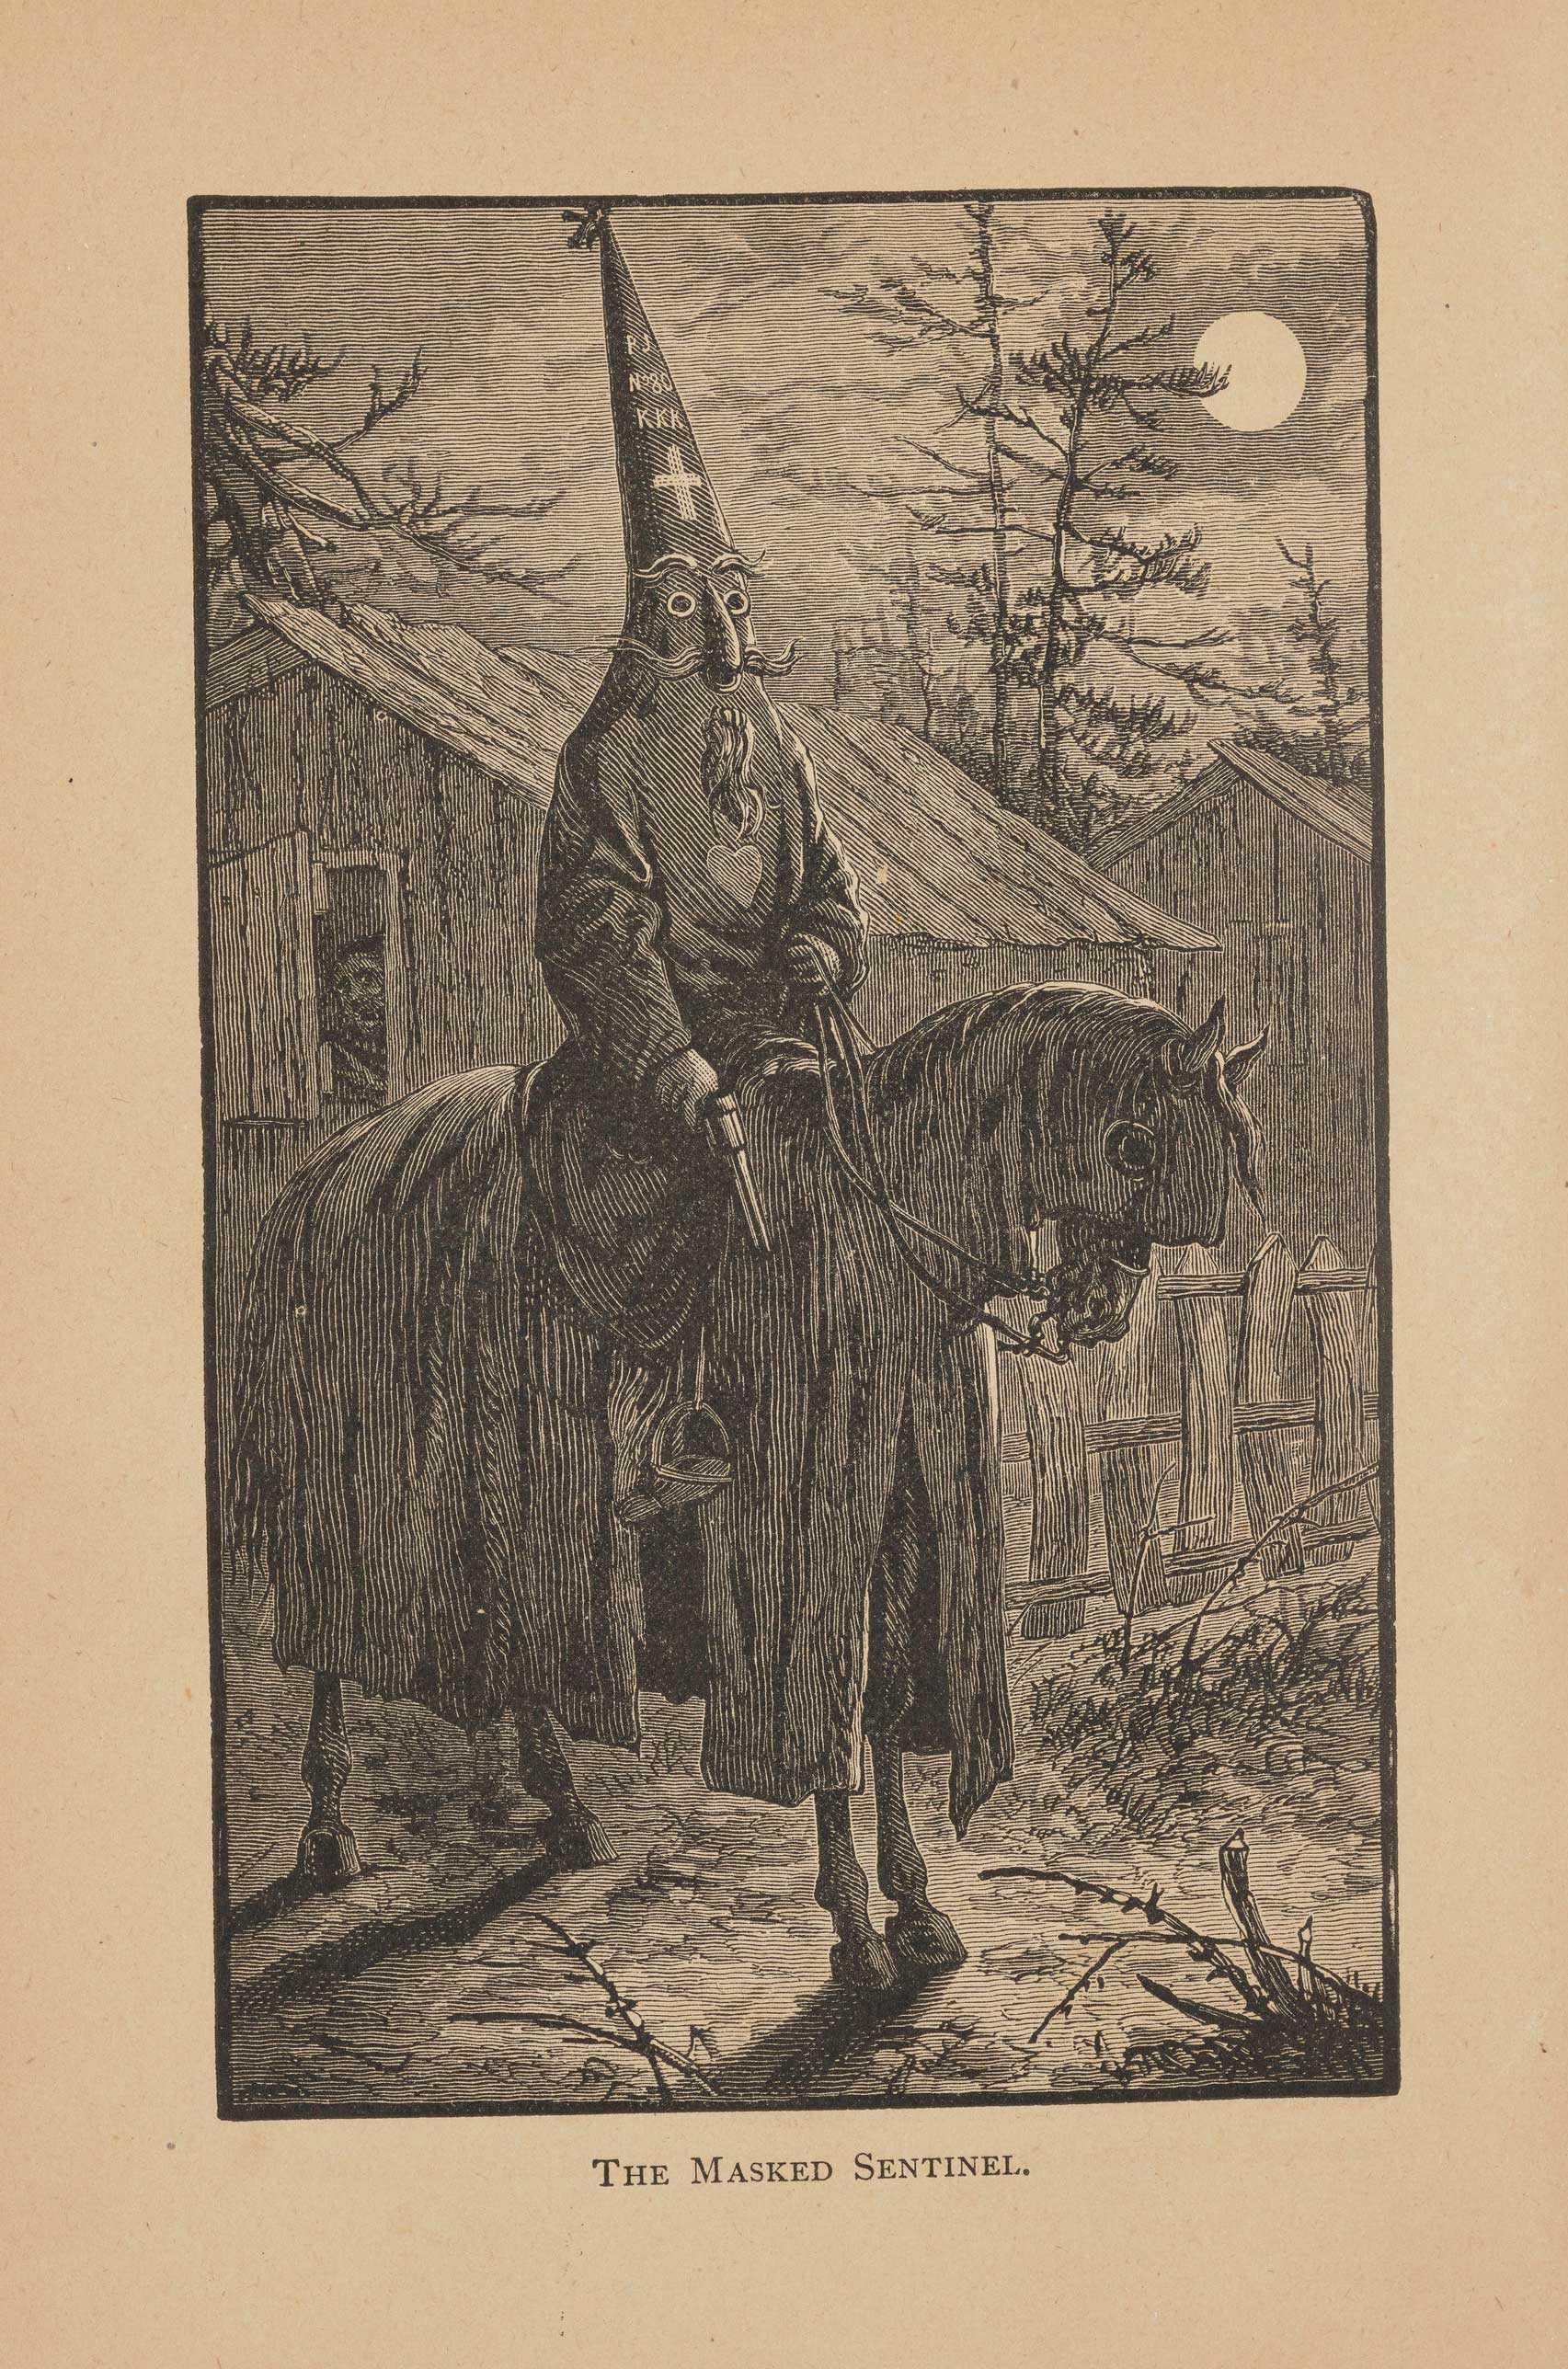 A print of a masked figure on a horse outside a cabin and full moon. He has a gun in his right hand.